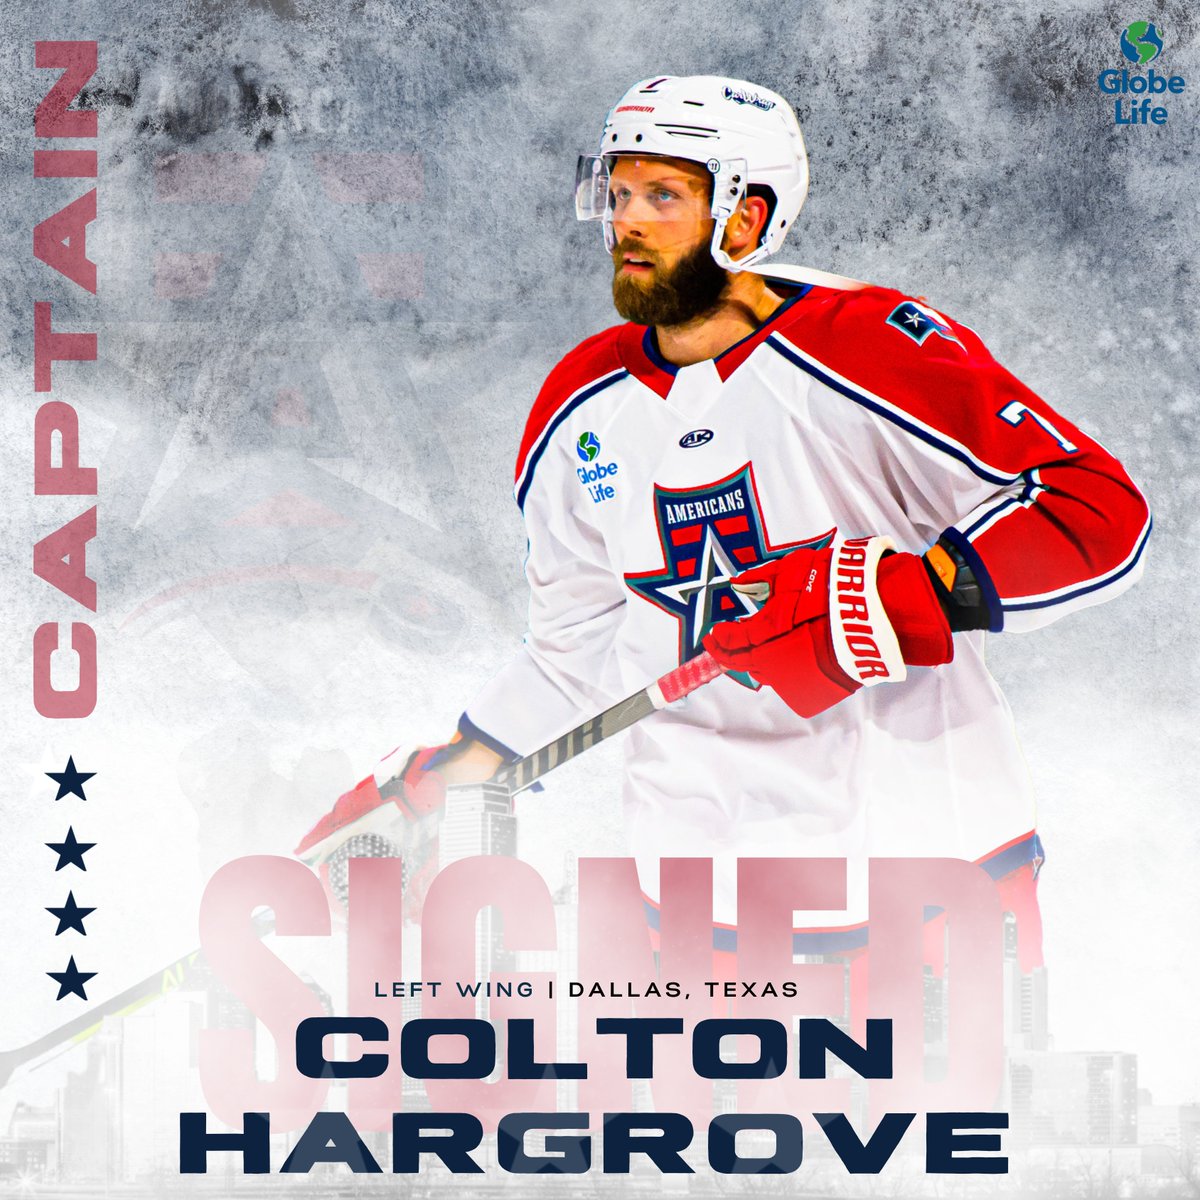 You know him-you love him...
Welcome back, Captain, Colton Hargrove!
#LiveInTheRed🇺🇸  #ALN15 #MeetTheTeam